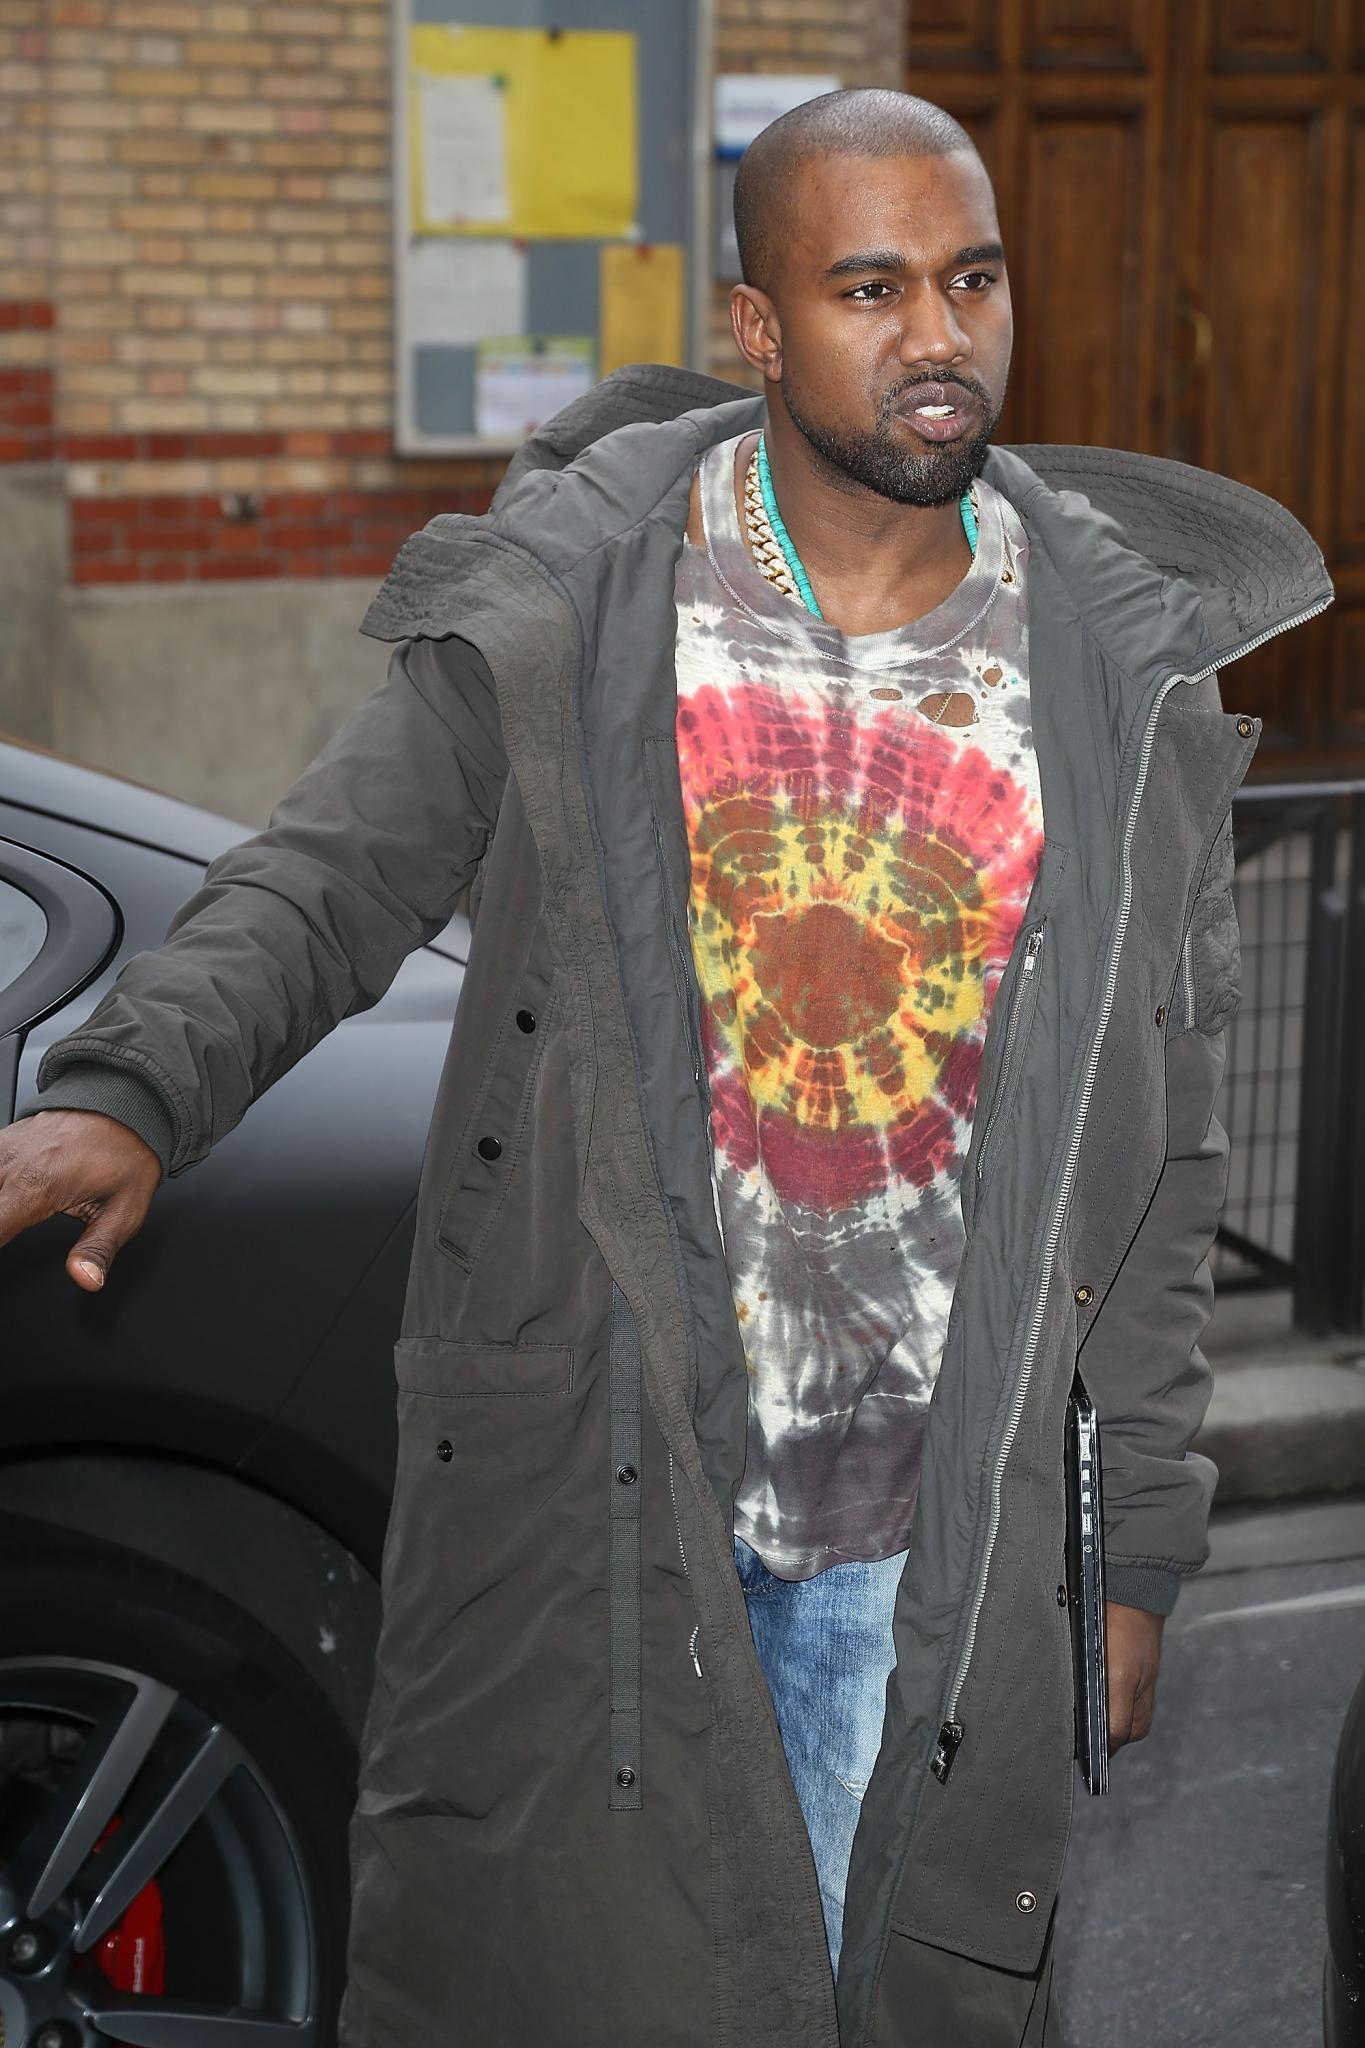 Kanye West Being Investigated After Scuffle
